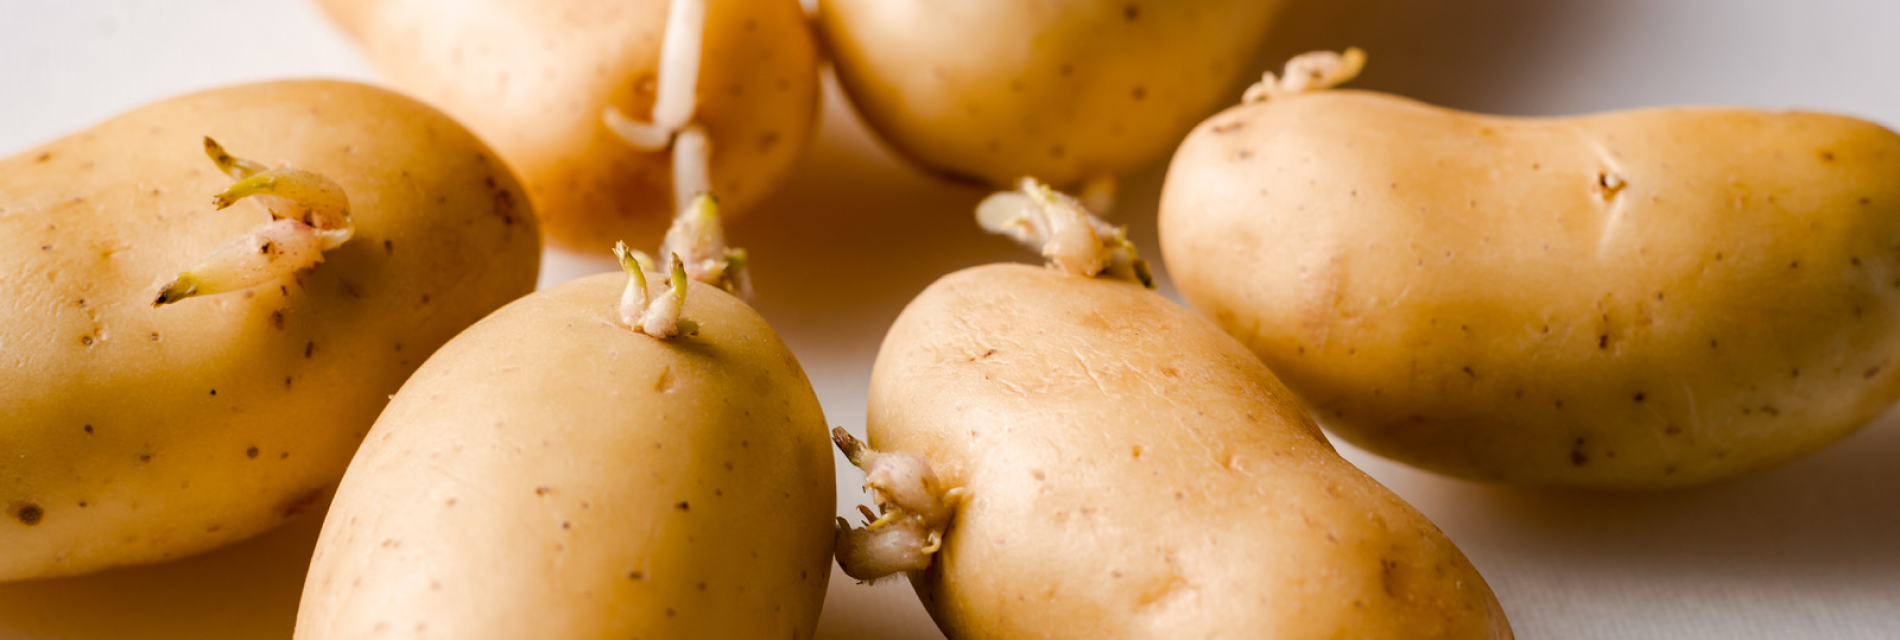 Is It Ok To Eat Potatoes That Have Sprouted?